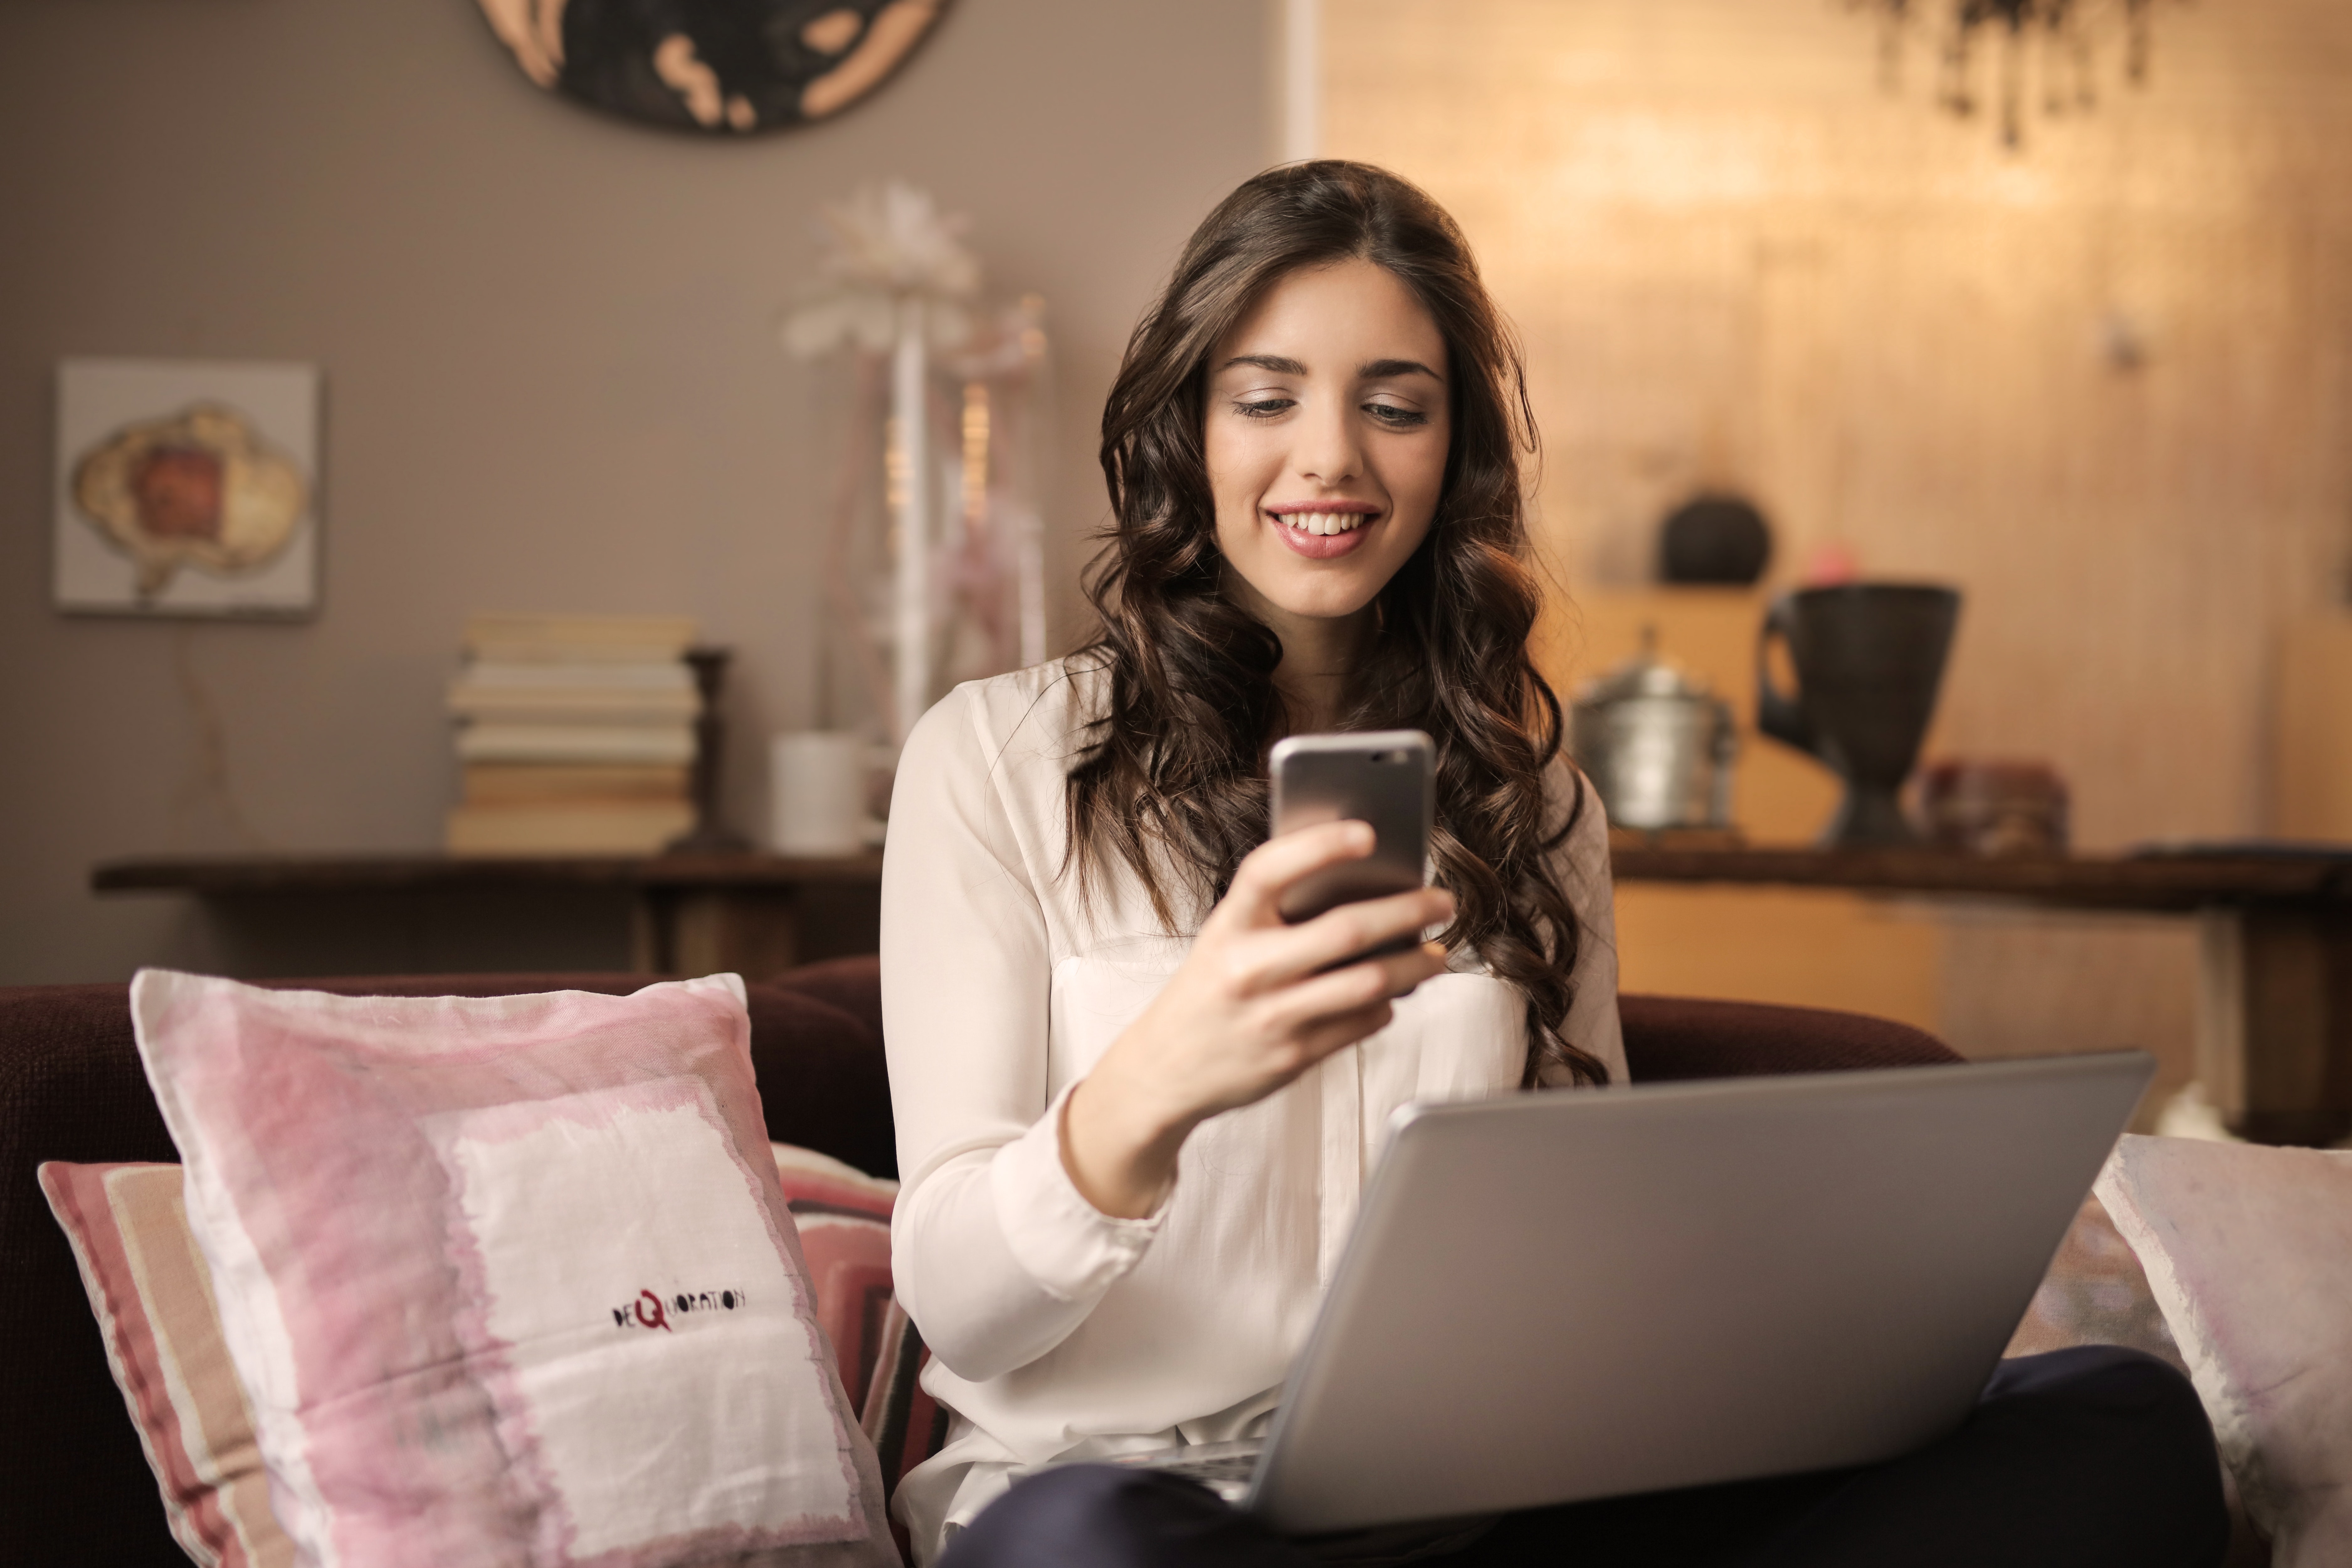 Woman Sitting on Sofa While Looking at Phone With Laptop on Lap, Adult, Online, Woman, Technology, HQ Photo